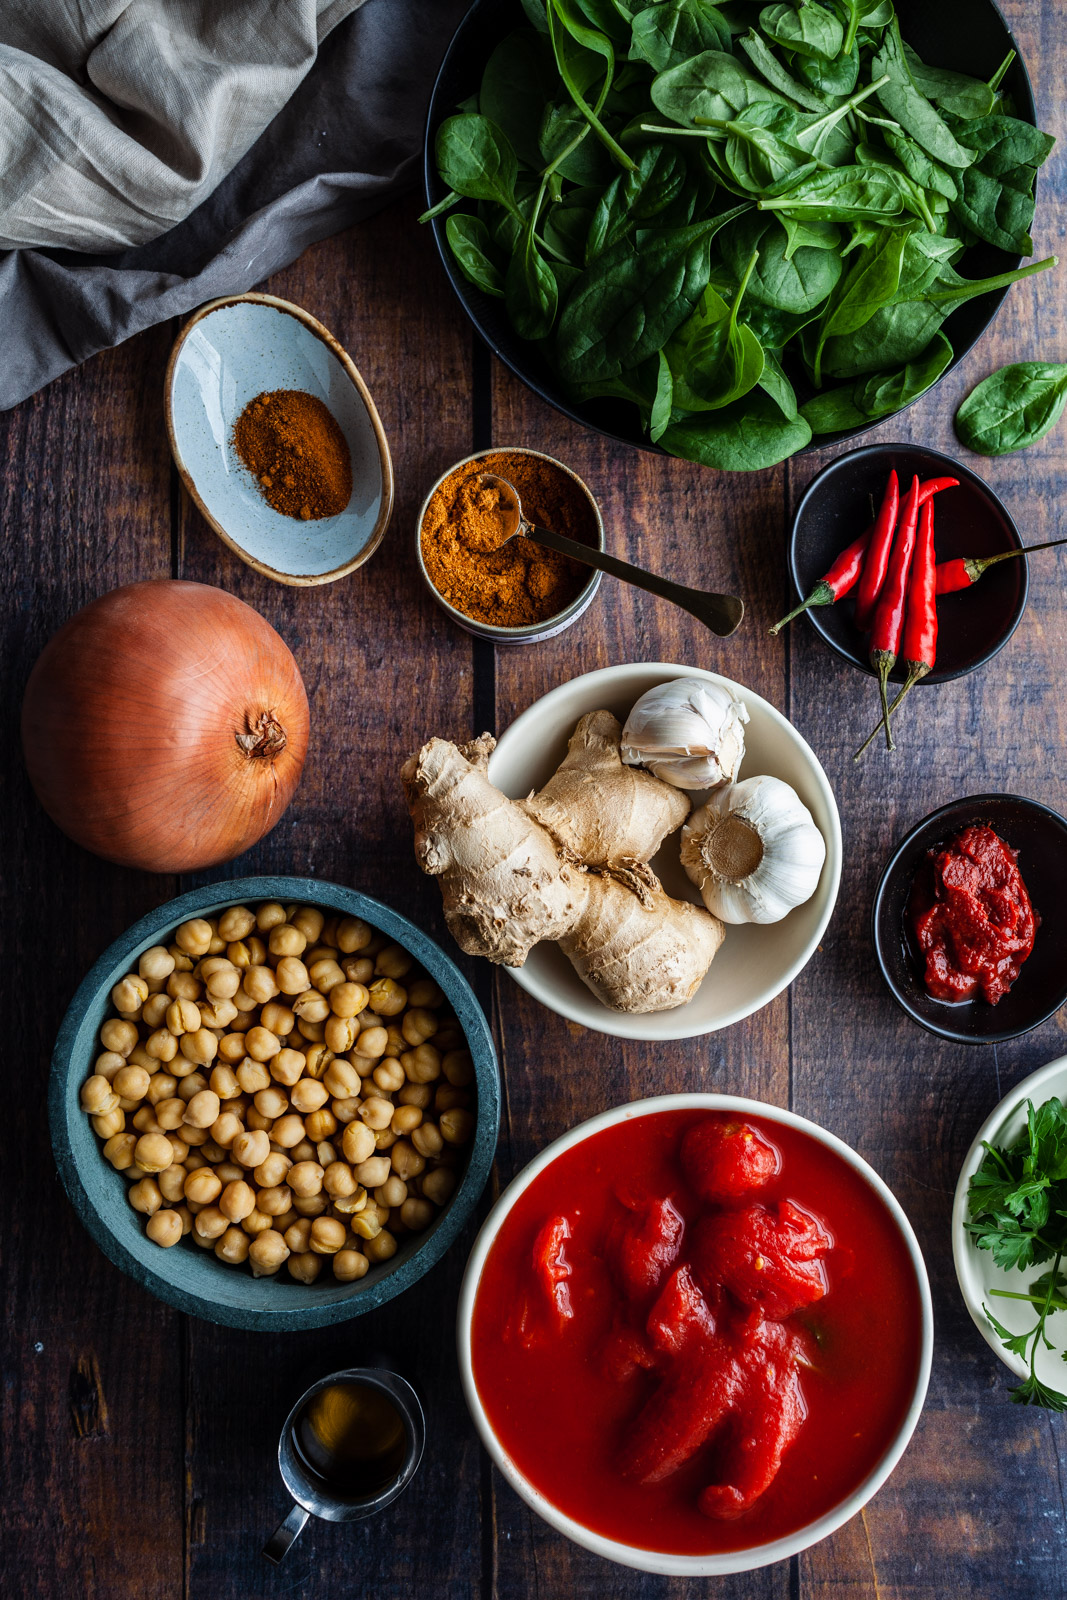 Curried Chickpeas With Spinach and Tomatoes